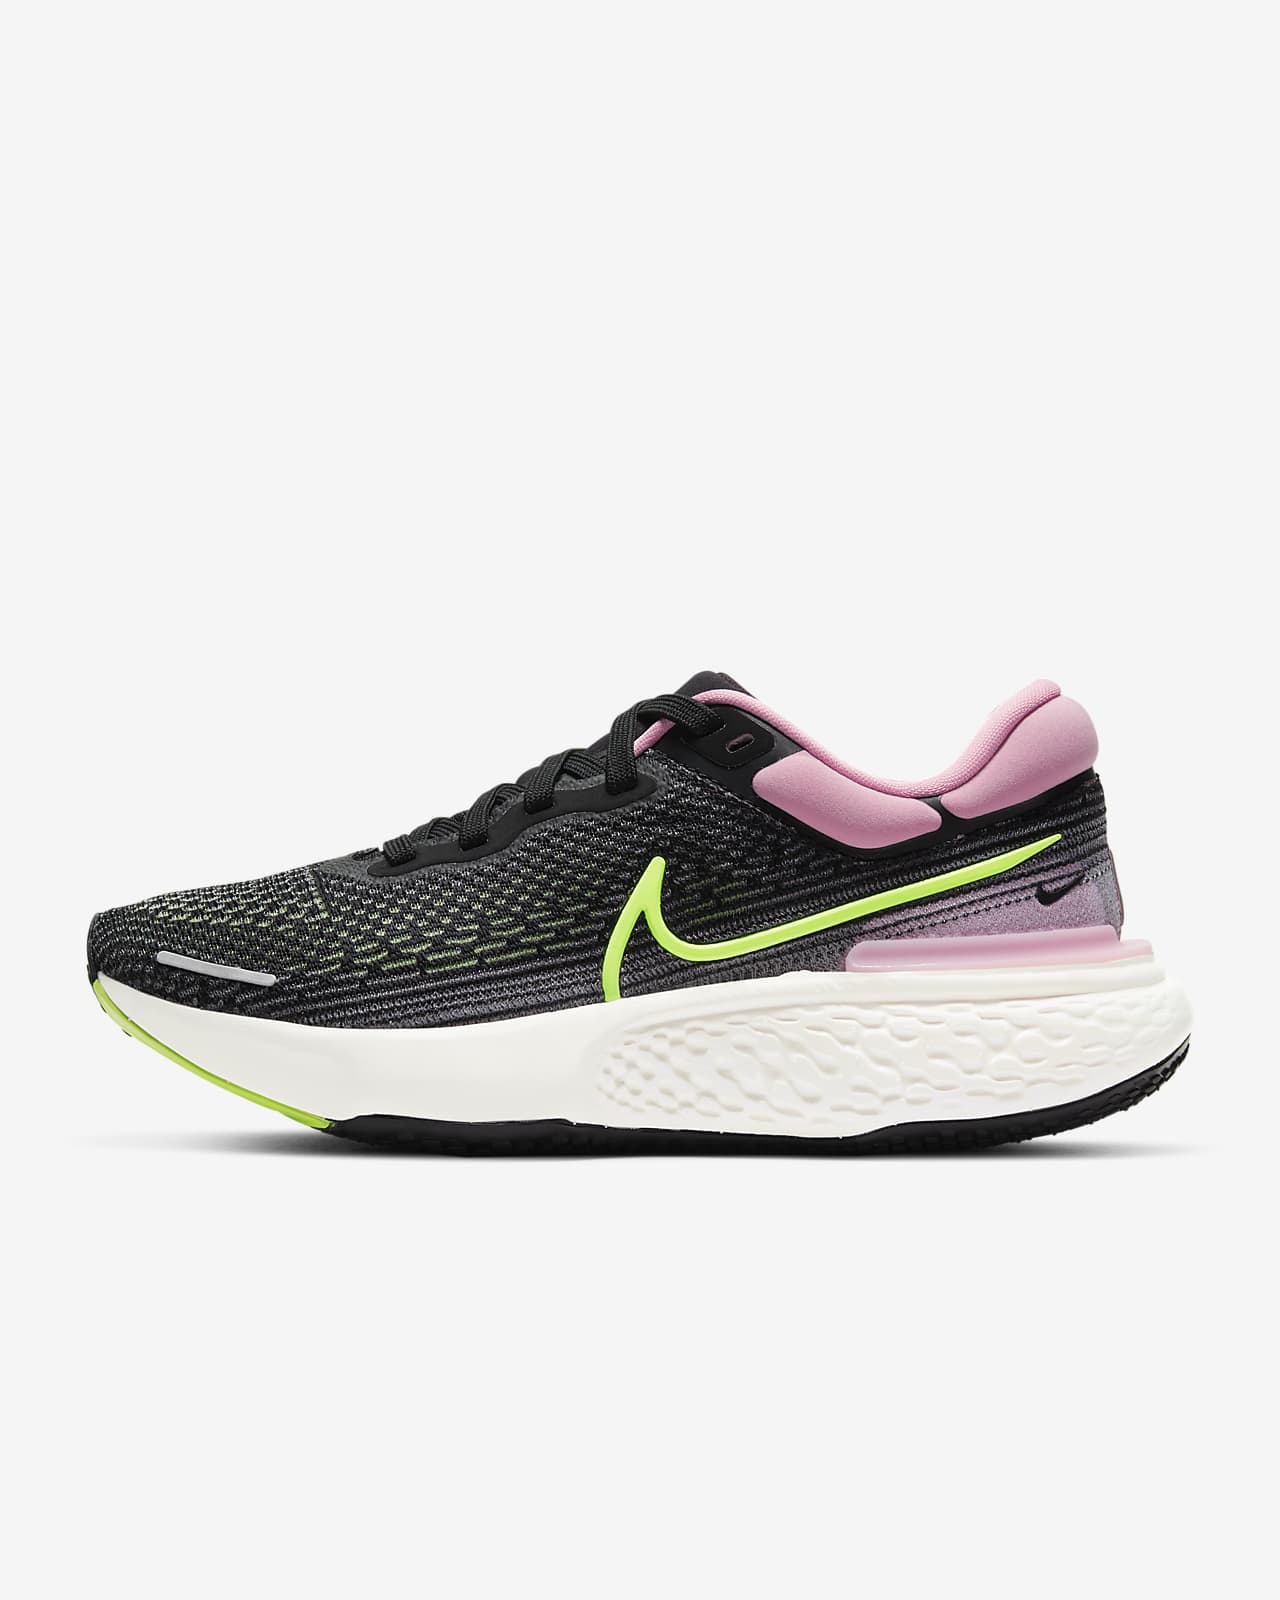 nike womens running shoes black and pink